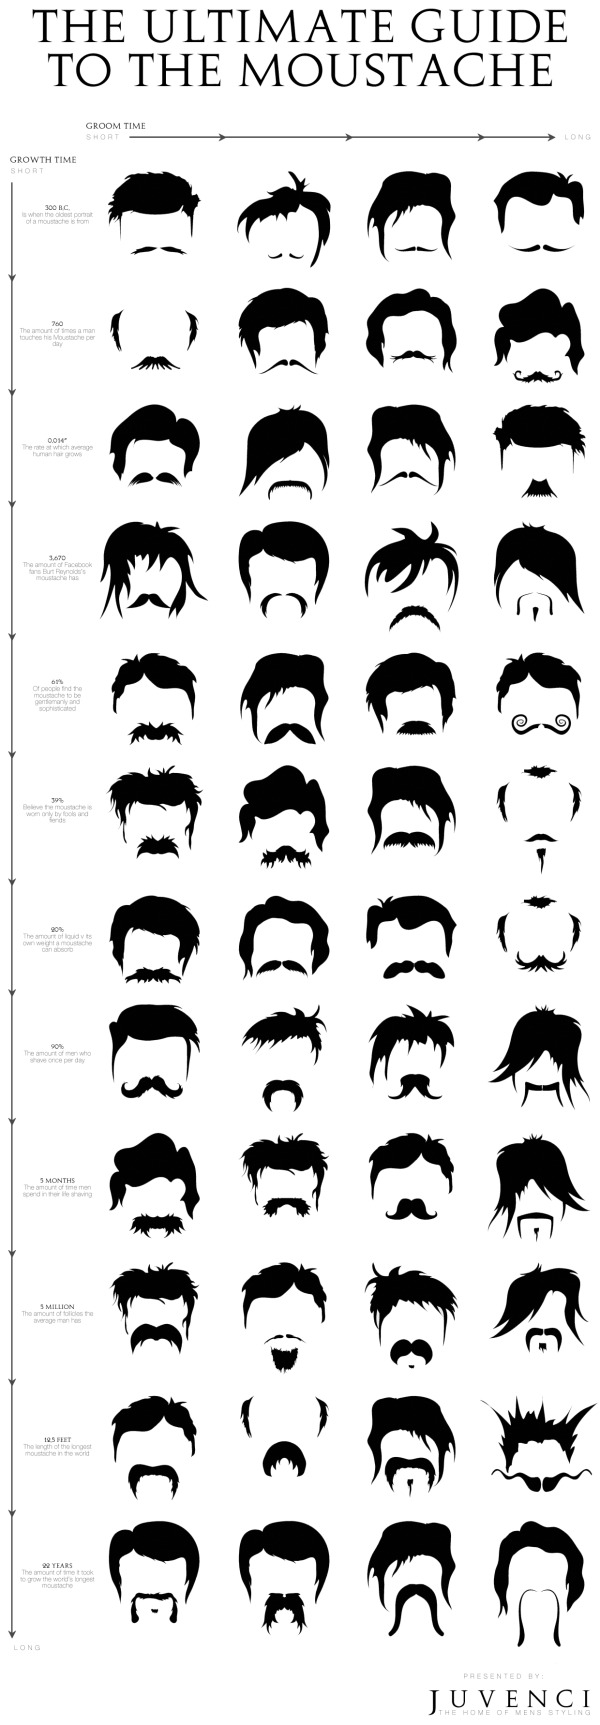 The Ultimate Guide to the Moustache infographic